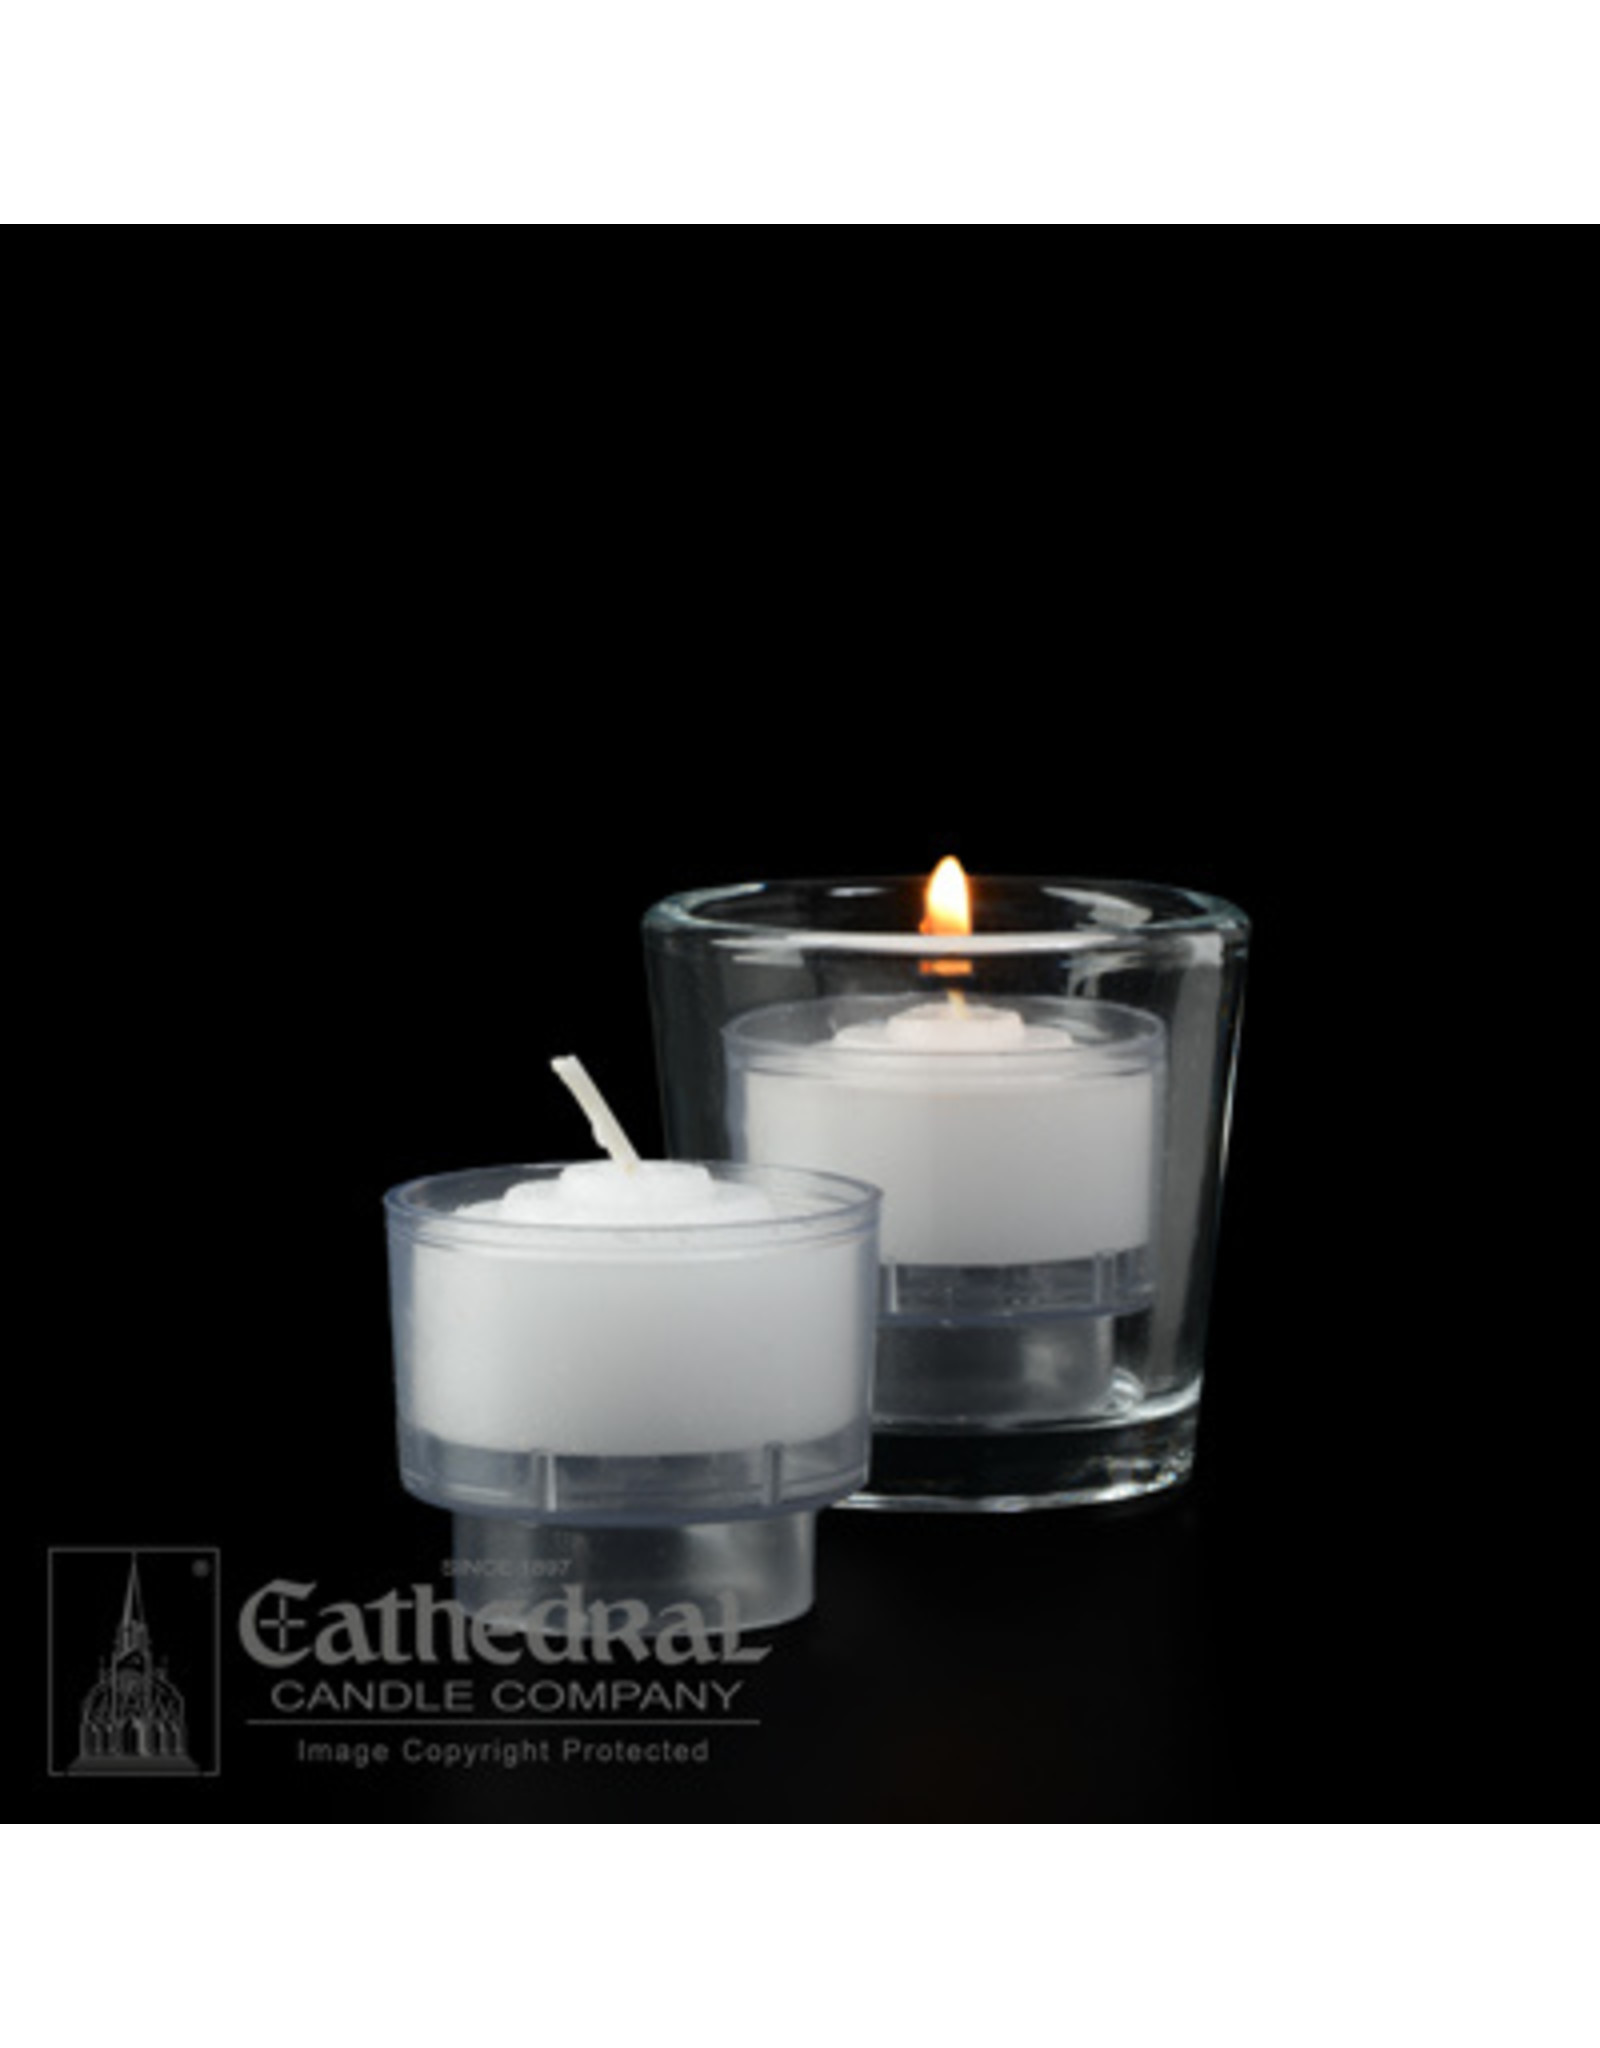 Cathedral Candle 4-Hour Crystal Votive ez-Lite Candles (Box of 144)